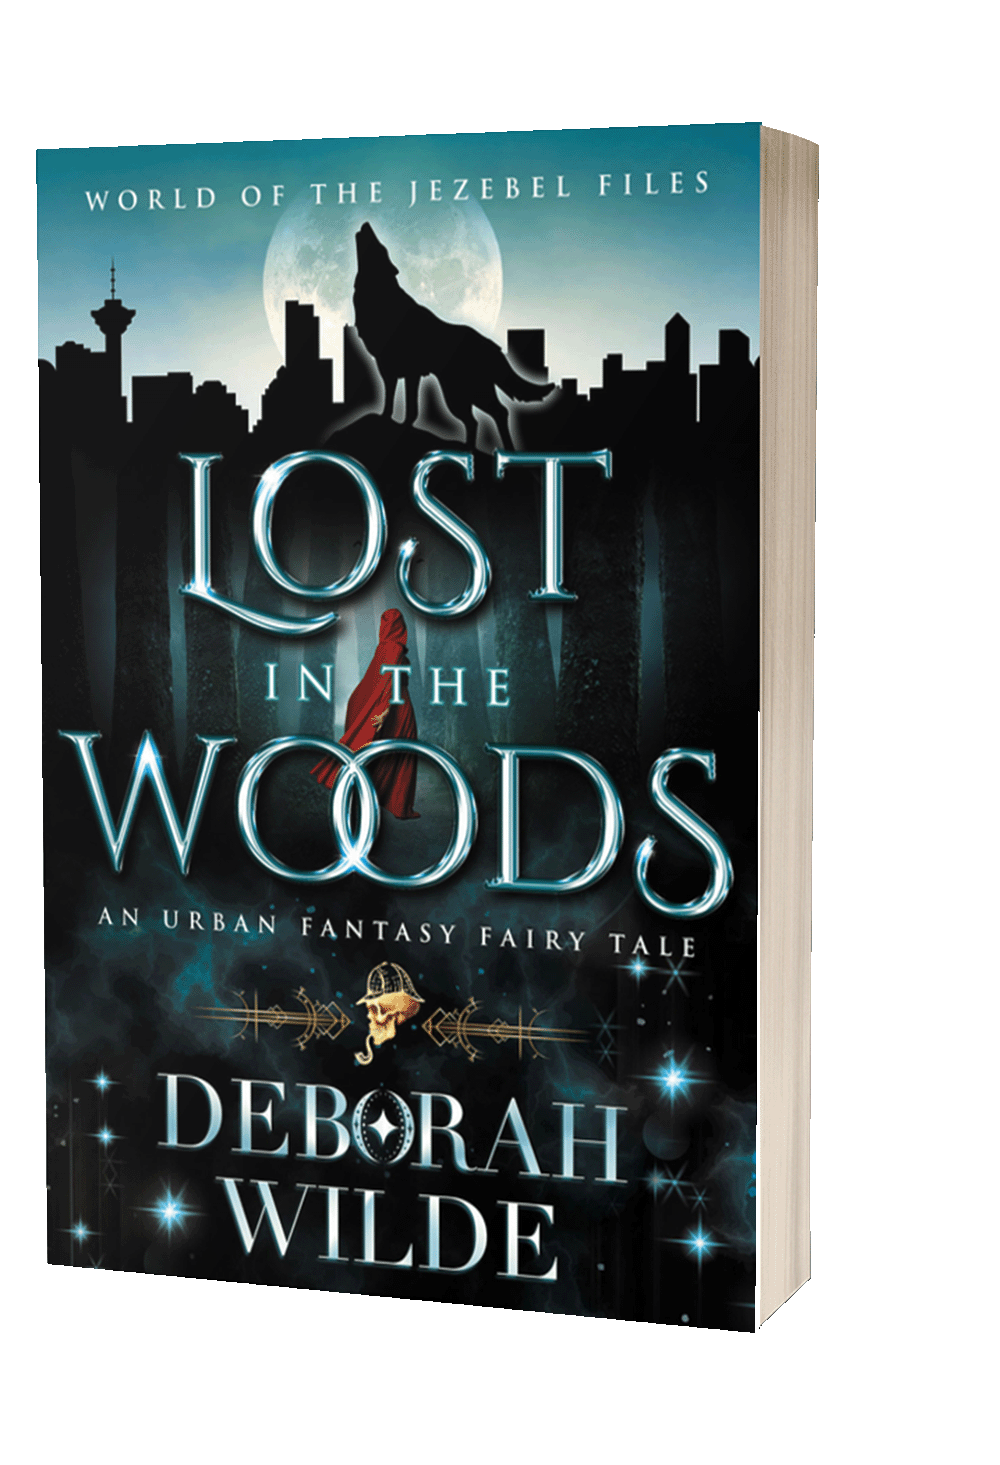 Paperback of Lost in the Woods book 2 of The World of the Jezebel Files urban fantasy duology by Deborah Wilde.